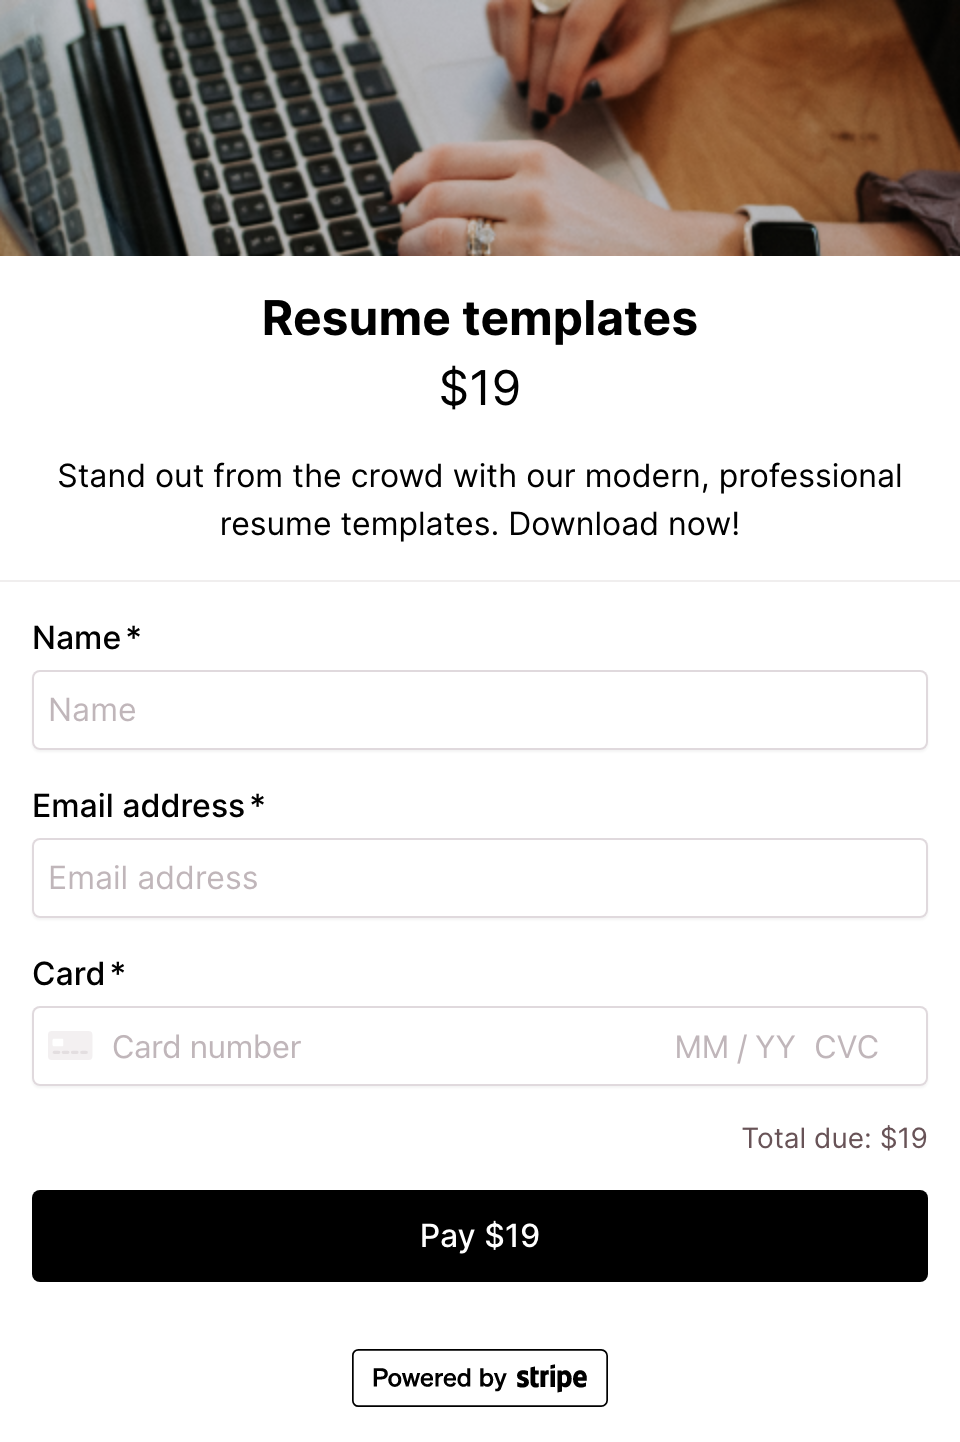 Resume templates checkout form